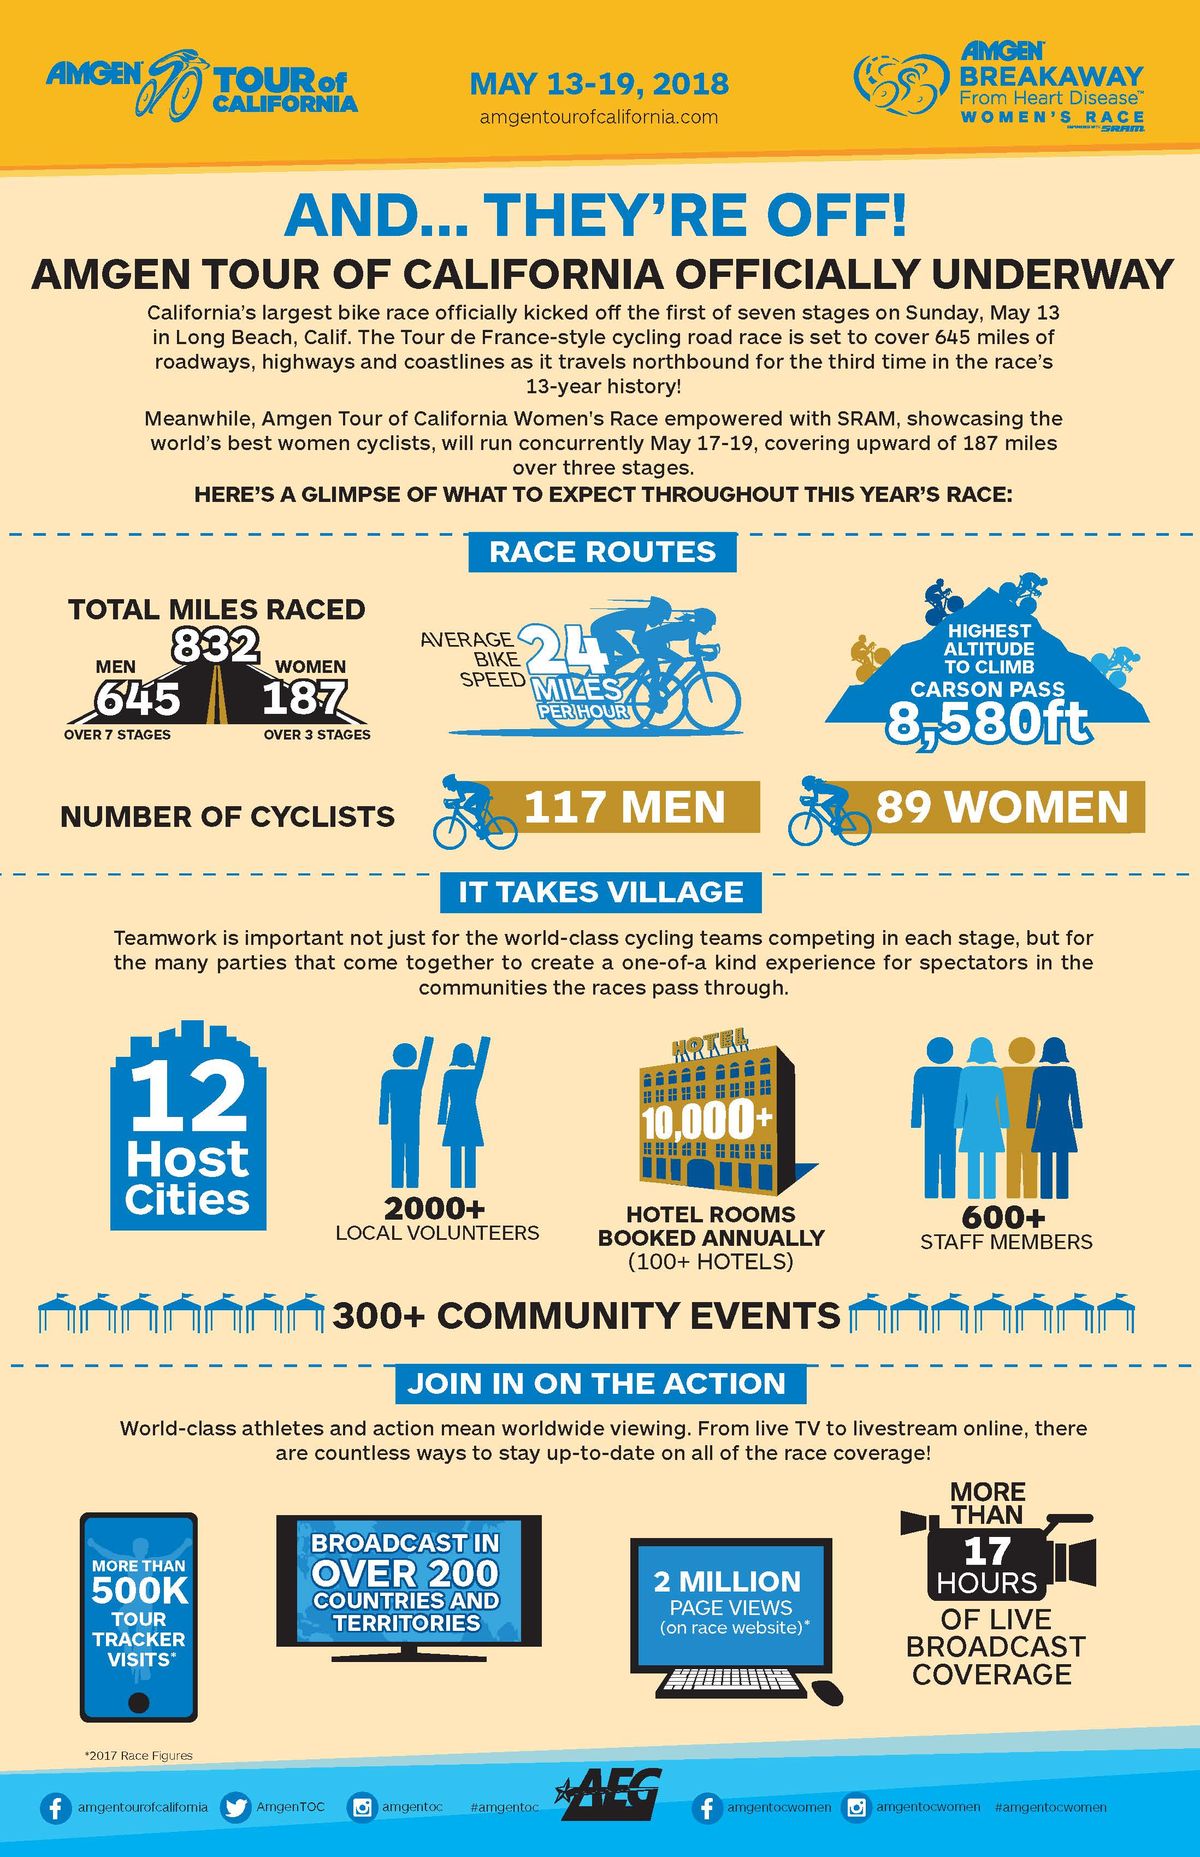 The Amgen Tour of California 2018 Infographic higlights what to expect during this year's race including racing a total of 832 miles between 117 male and 89 female athletes. 